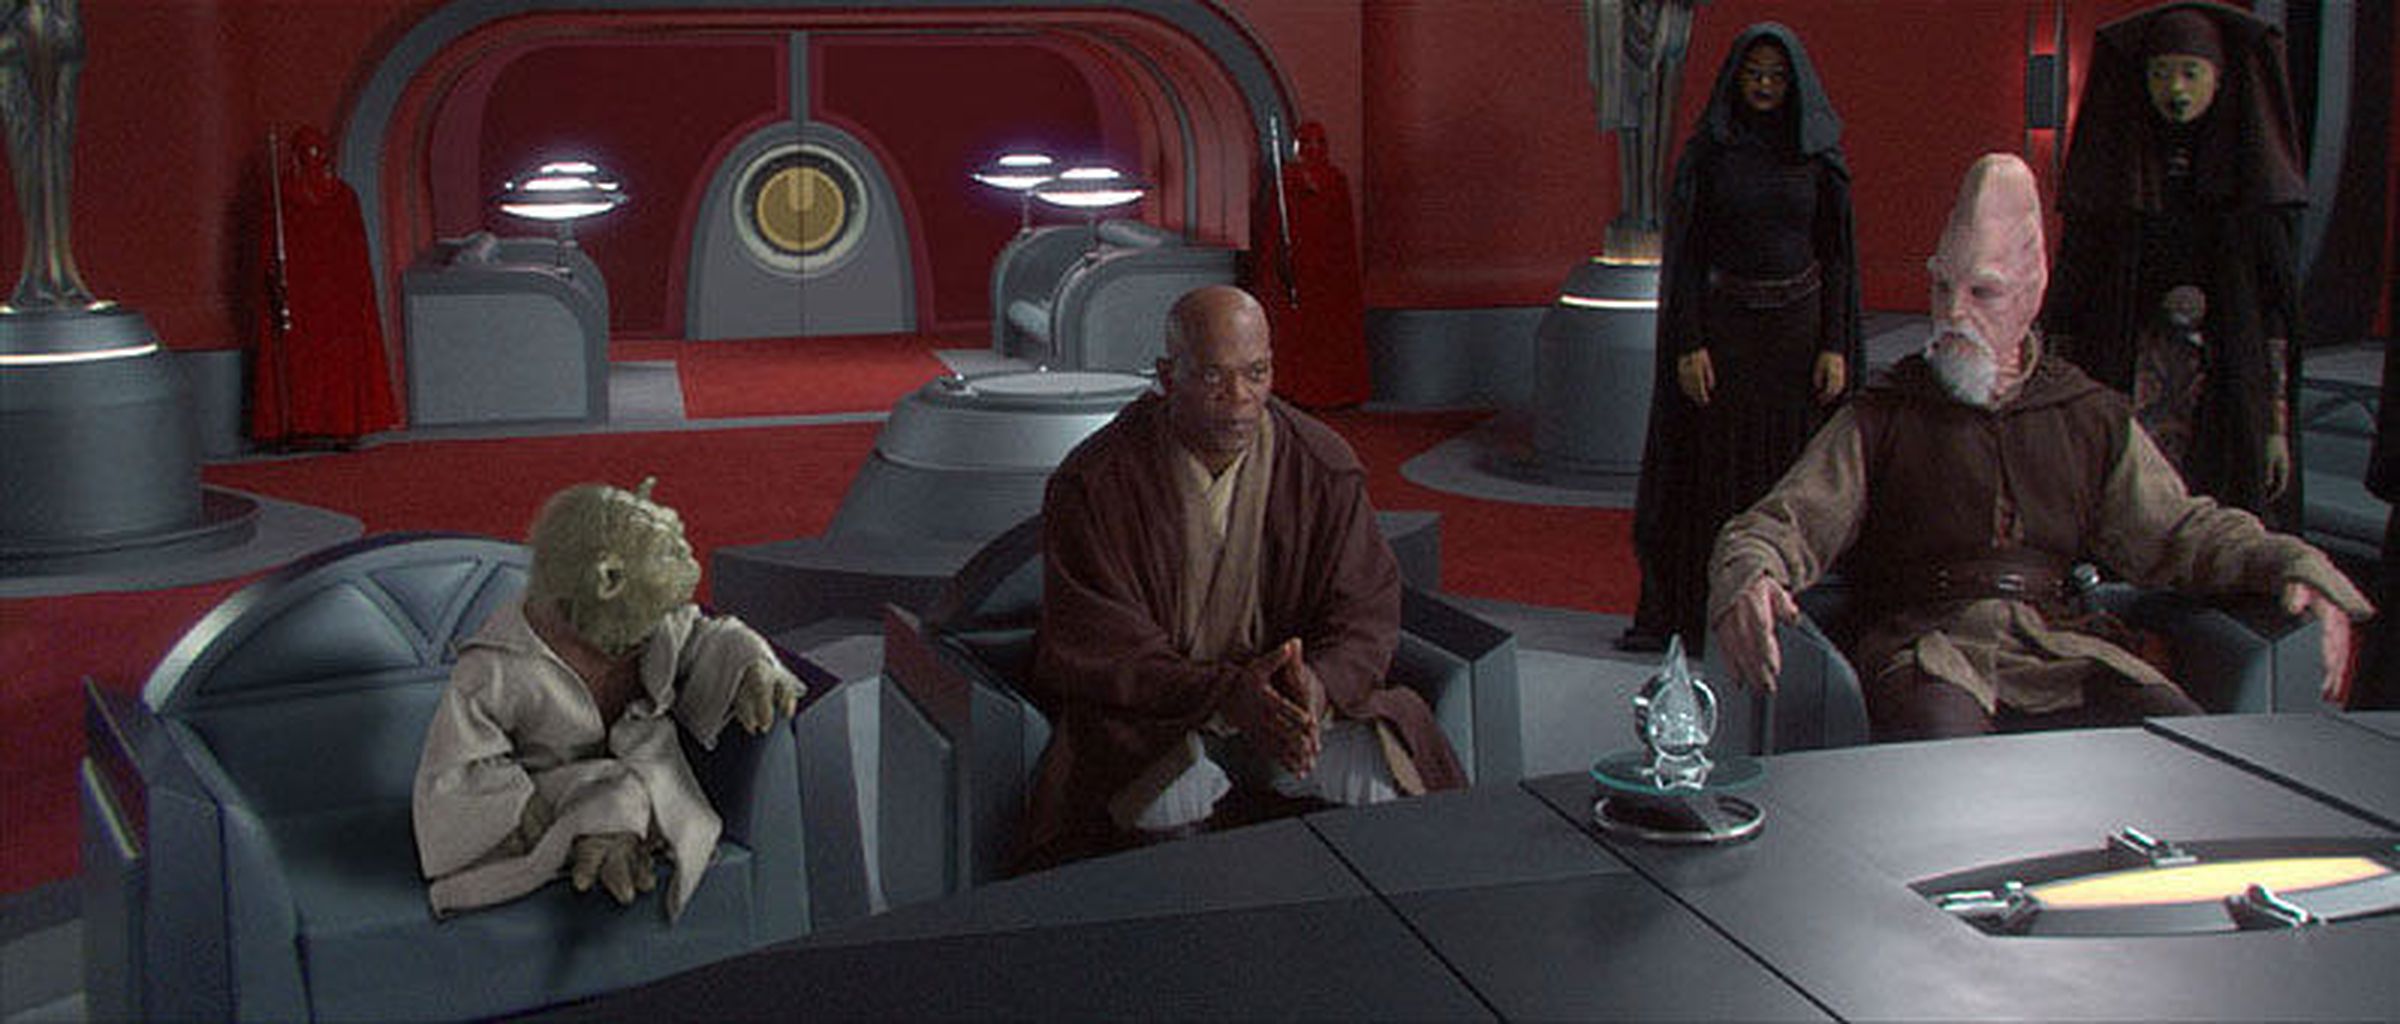 Yoda conducting Jedi Council business, clearly sans-shoes.